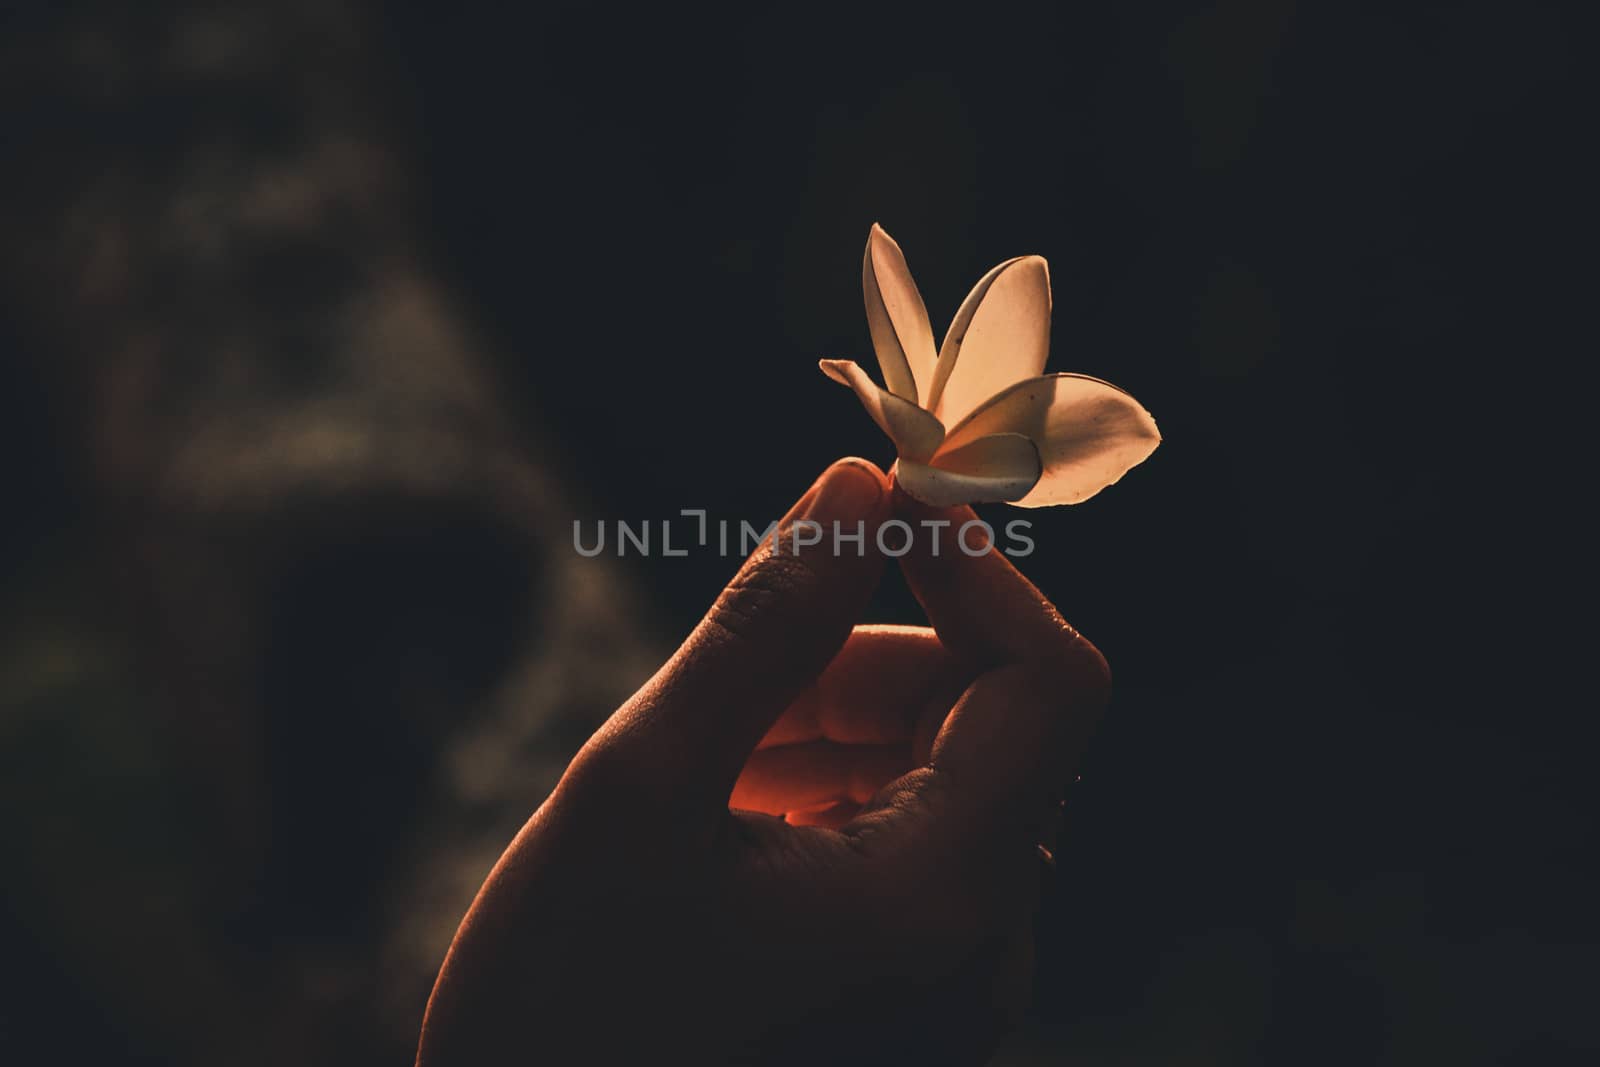 Holding a flower up to the light showing concept of hope, welcoming spring time, new beginnings, mental health, self care and wellness in nature